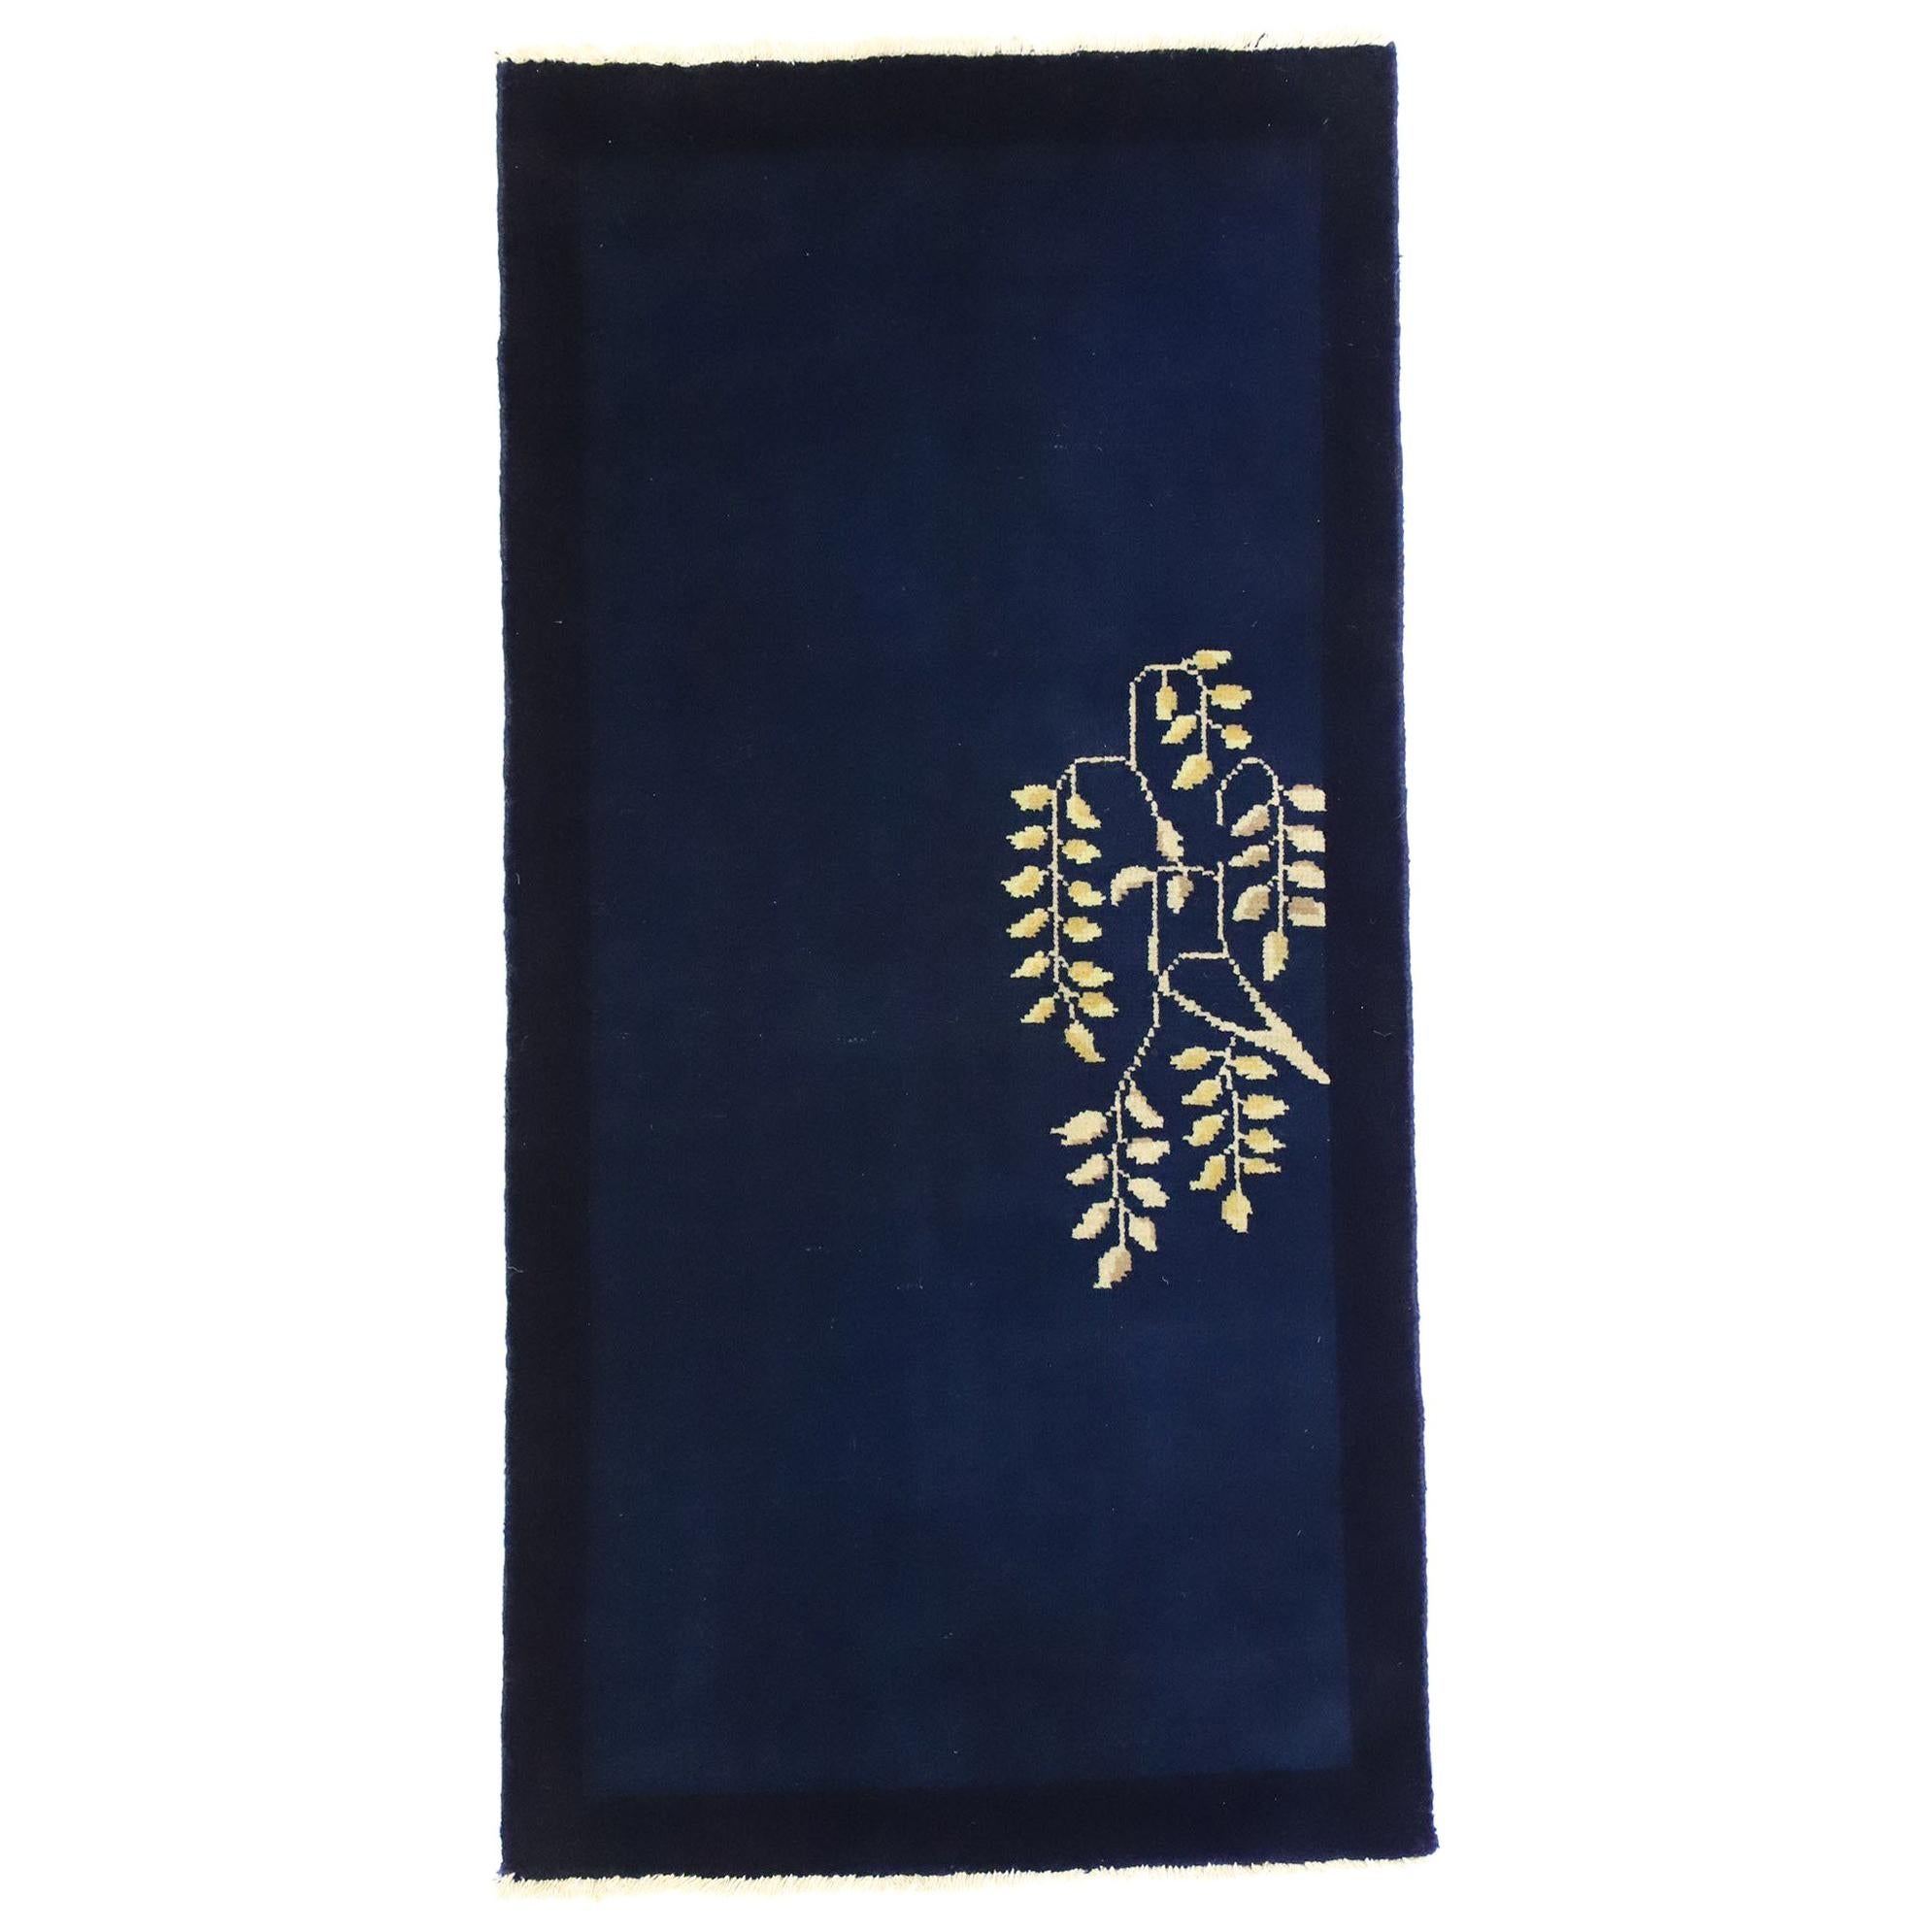 New Chinese Rug with Minimalist Qing Dynasty Style